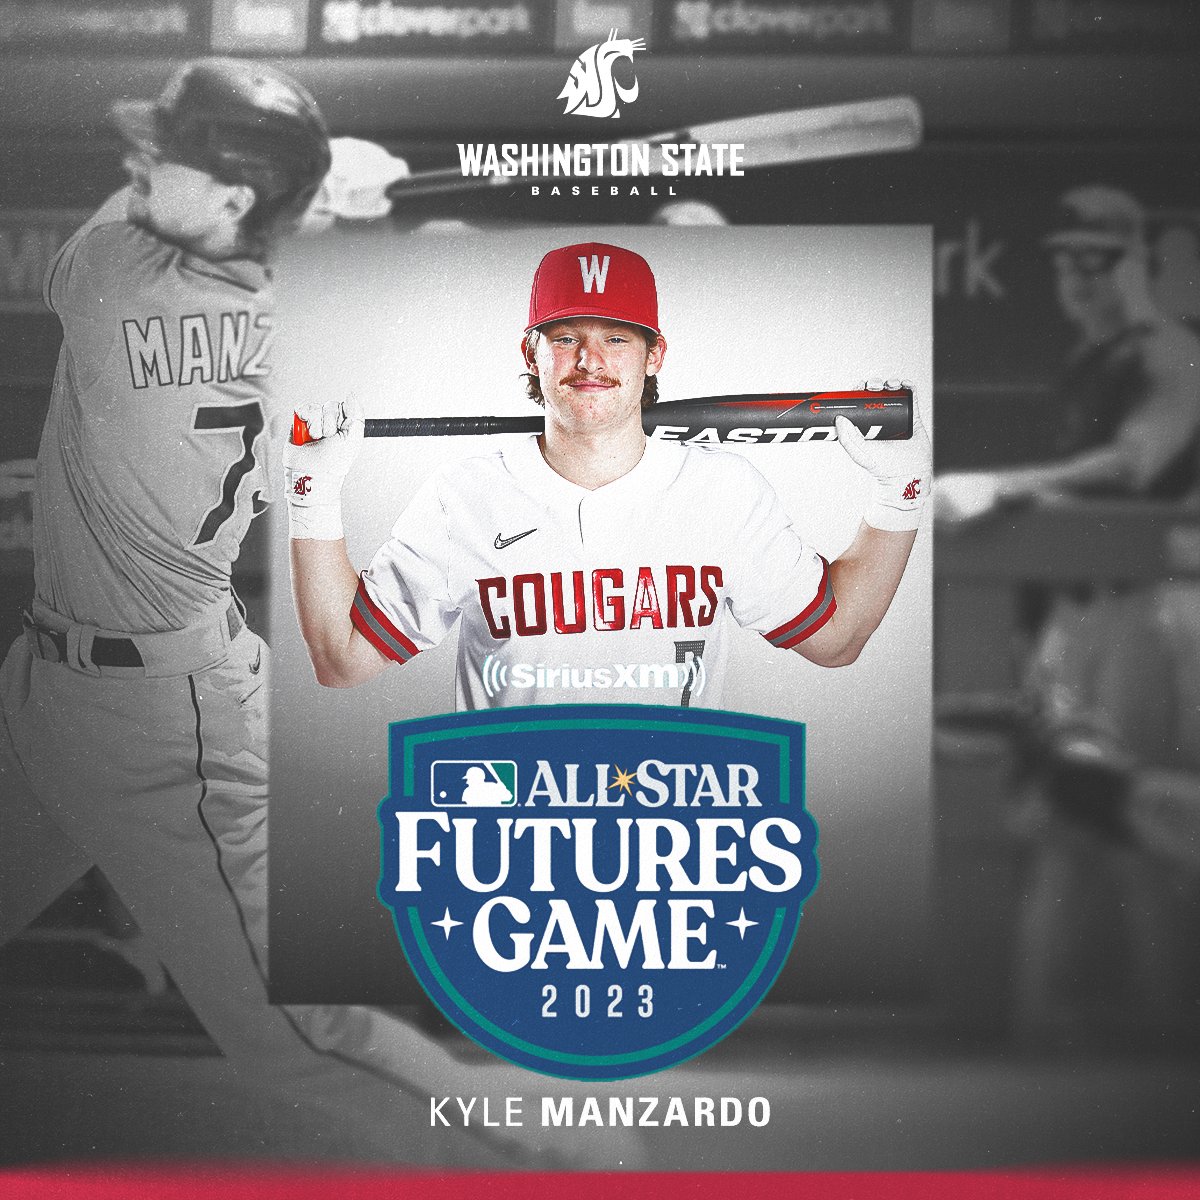 Coug Kyle Manzardo is headed to Seattle for the 2023 All Star Futures Game! 

shorturl.at/cAHS0

#GoCougs | #WAZZU | @KyleTMazardo